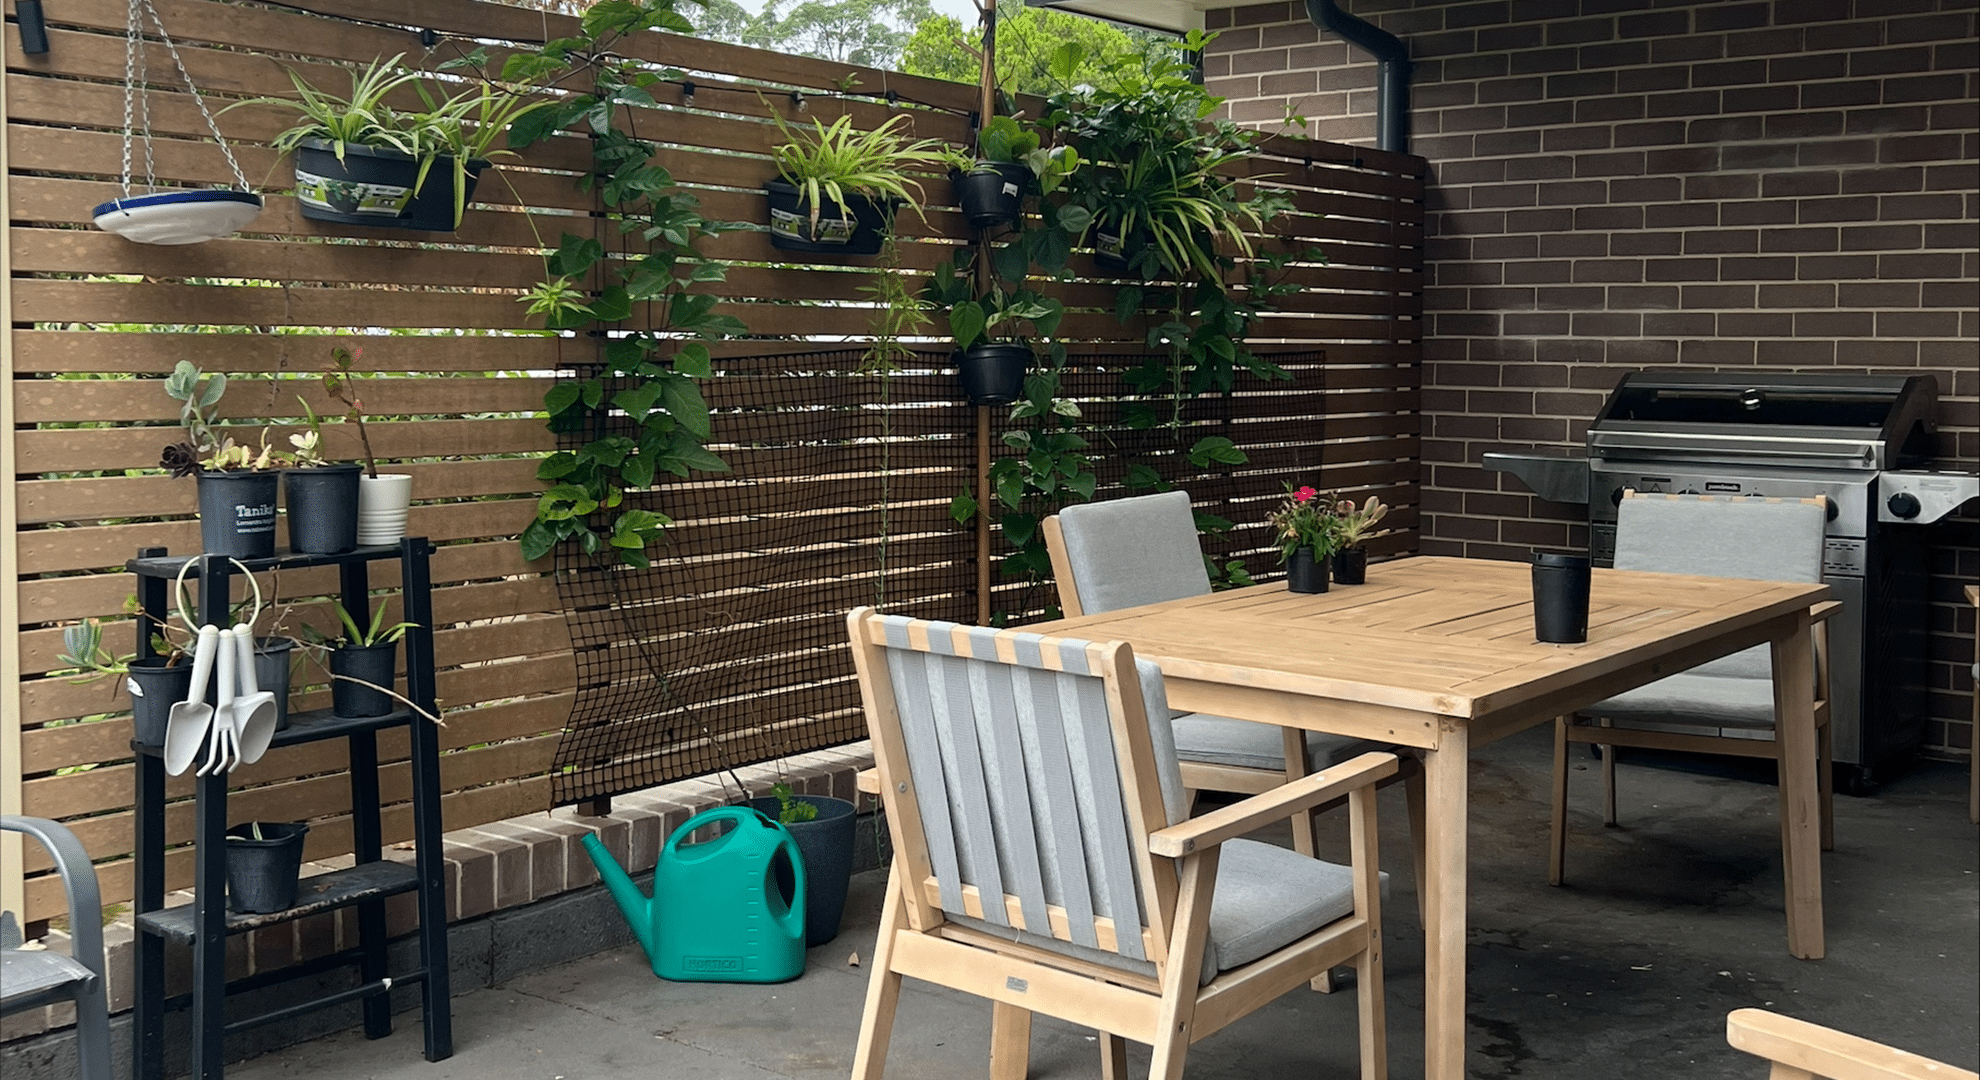 View of an undercover out entertaining area, with plants, dining table and bbq.